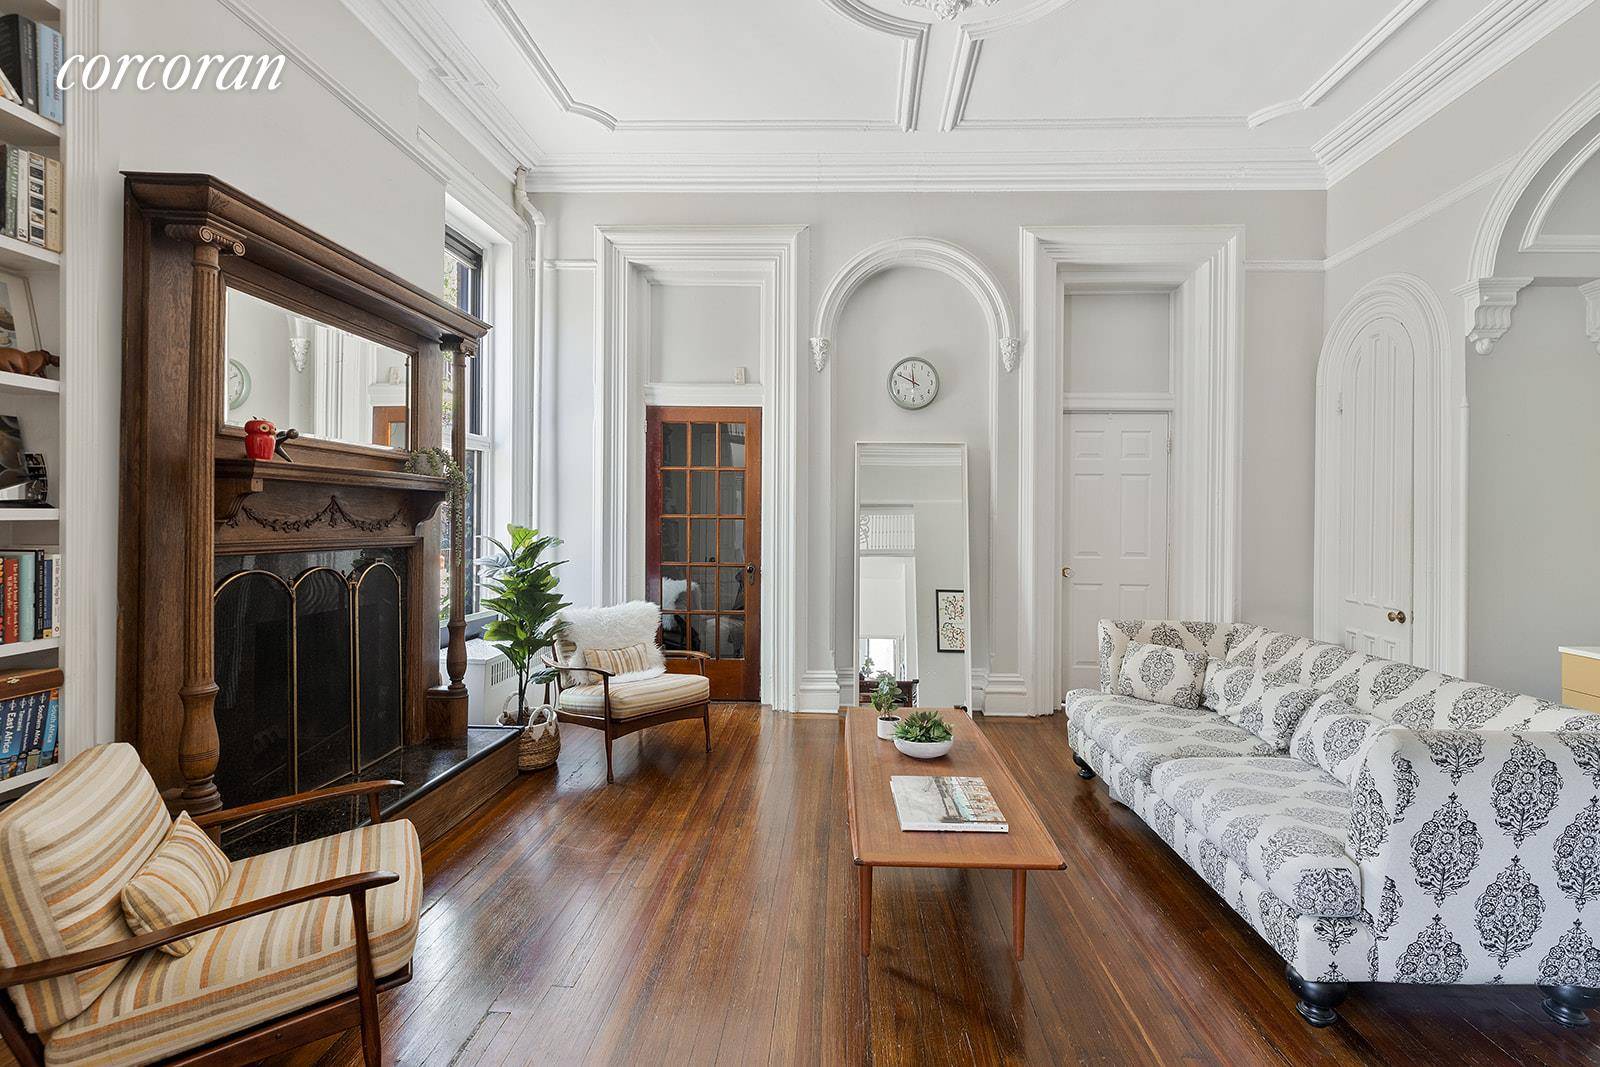 Enjoy the incredible charm and elegance of this grand 2 bedroom 1 bathroom North Park Slope gem in a beautiful boutique brownstone co op.